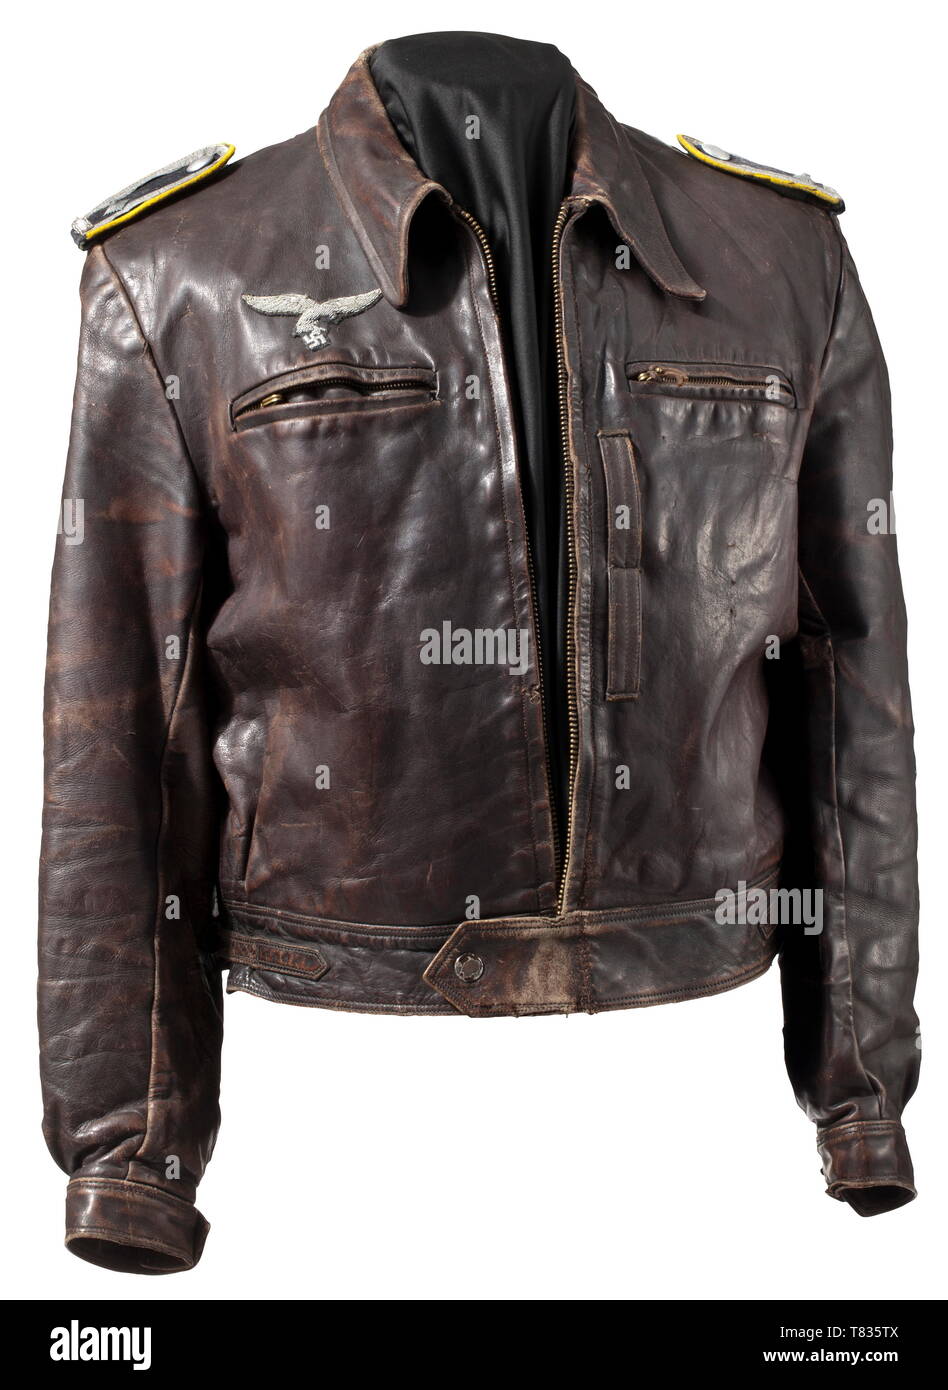 A leather jacket for a fighter pilot in the rank of an NCO Brown leather with looped shoulder boards, zipper ("Ritsch"), "PRYM" press buttons, brown lining, hand-embroidered officer's eagle sewn on. A few flaws and repairs. Clearly worn, privately purchased leather jacket for a fighter pilot. historic, historical, Air Force, branch of service, branches of service, armed service, armed services, military, militaria, air forces, object, objects, stills, clipping, clippings, cut out, cut-out, cut-outs, 20th century, Editorial-Use-Only Stock Photo